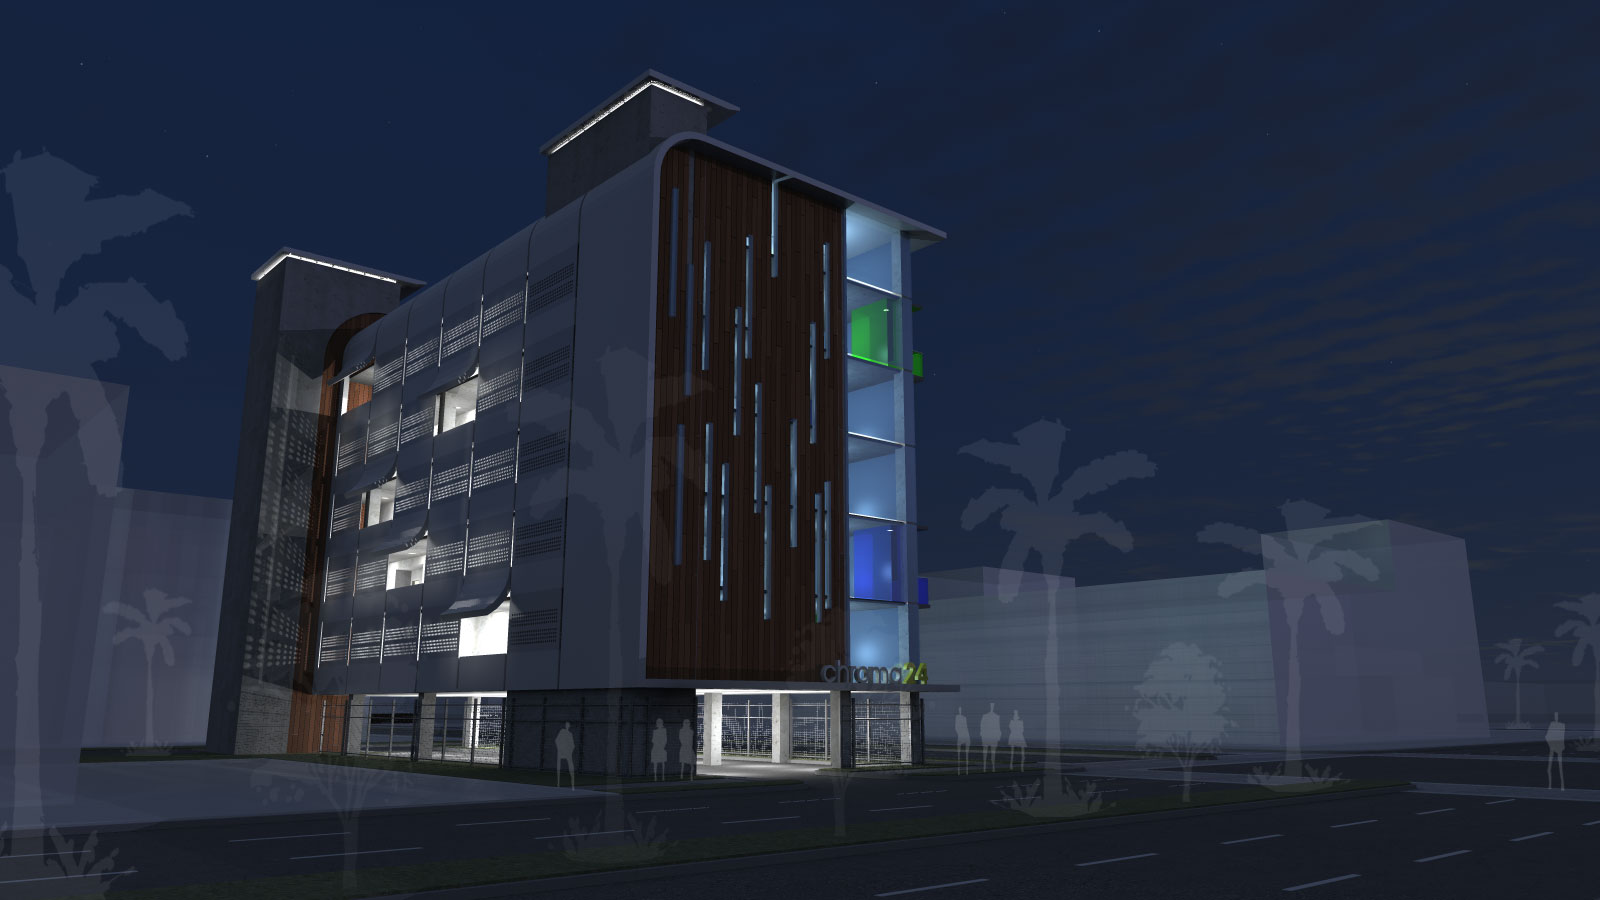 RD-rel8-Architects-Tampa-Chroma-nSE.jpg